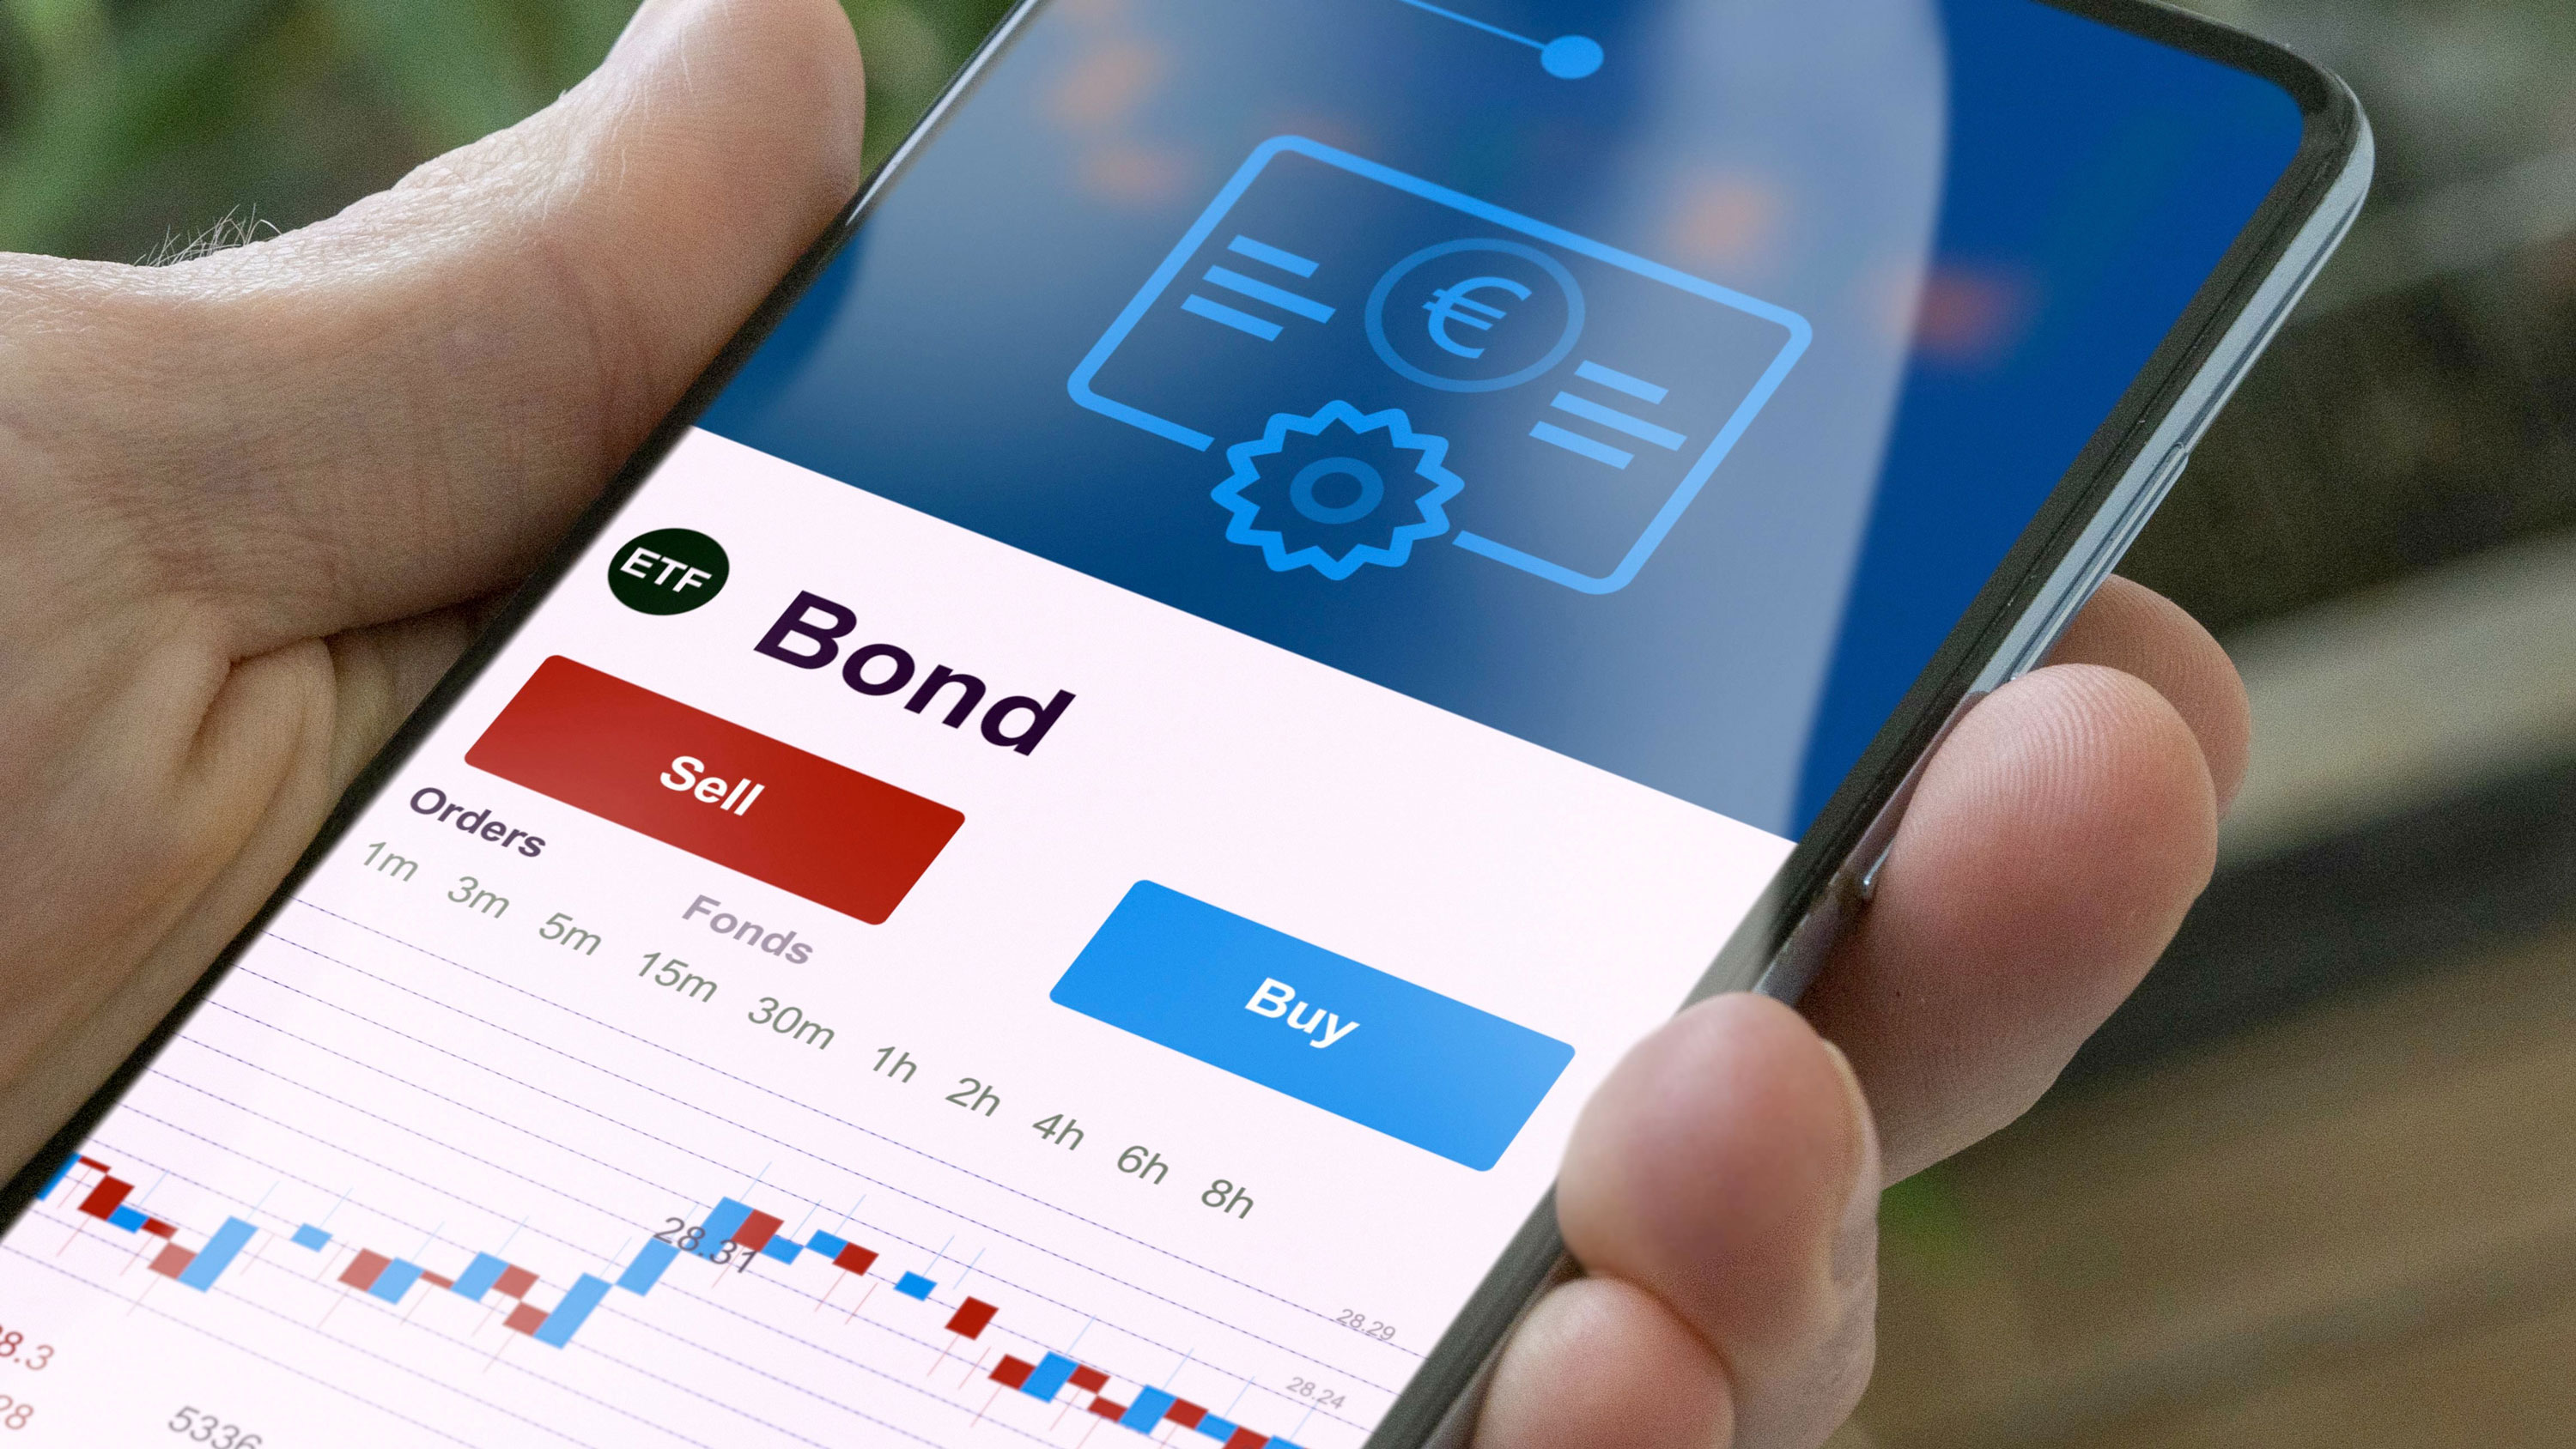 Bonds – where to find opportunities now